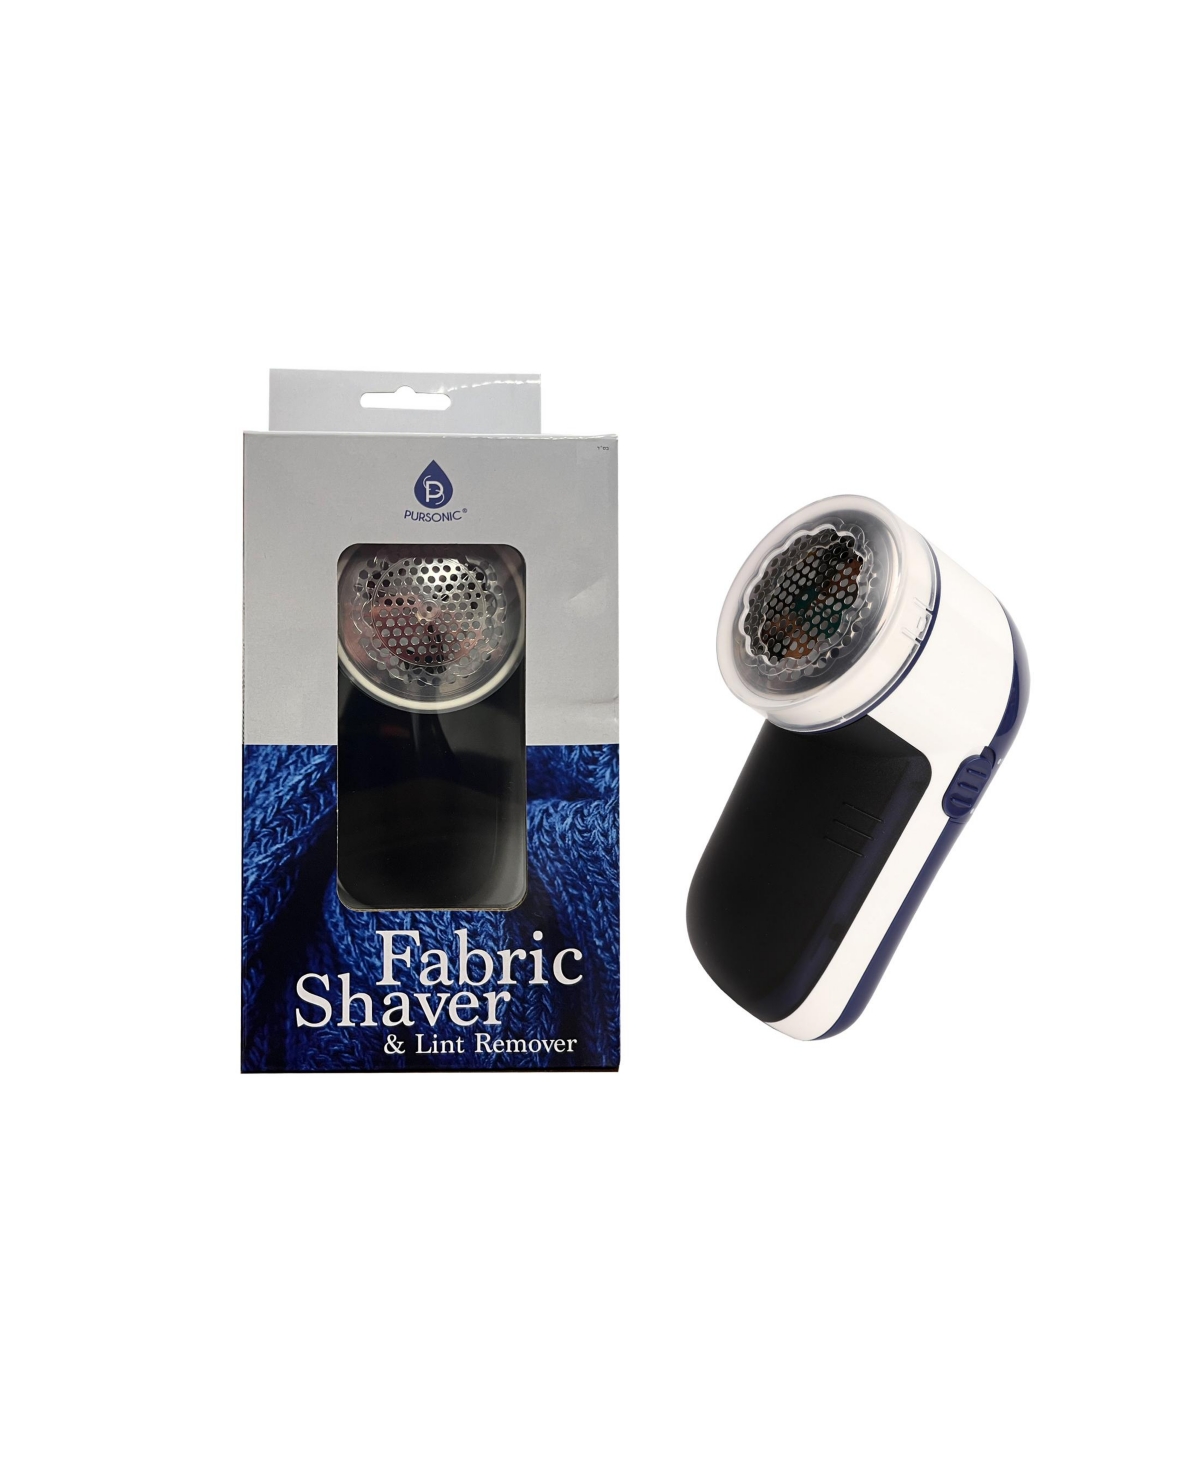 Fabric Shaver & Lint Remover with Cleaning Brush - Black